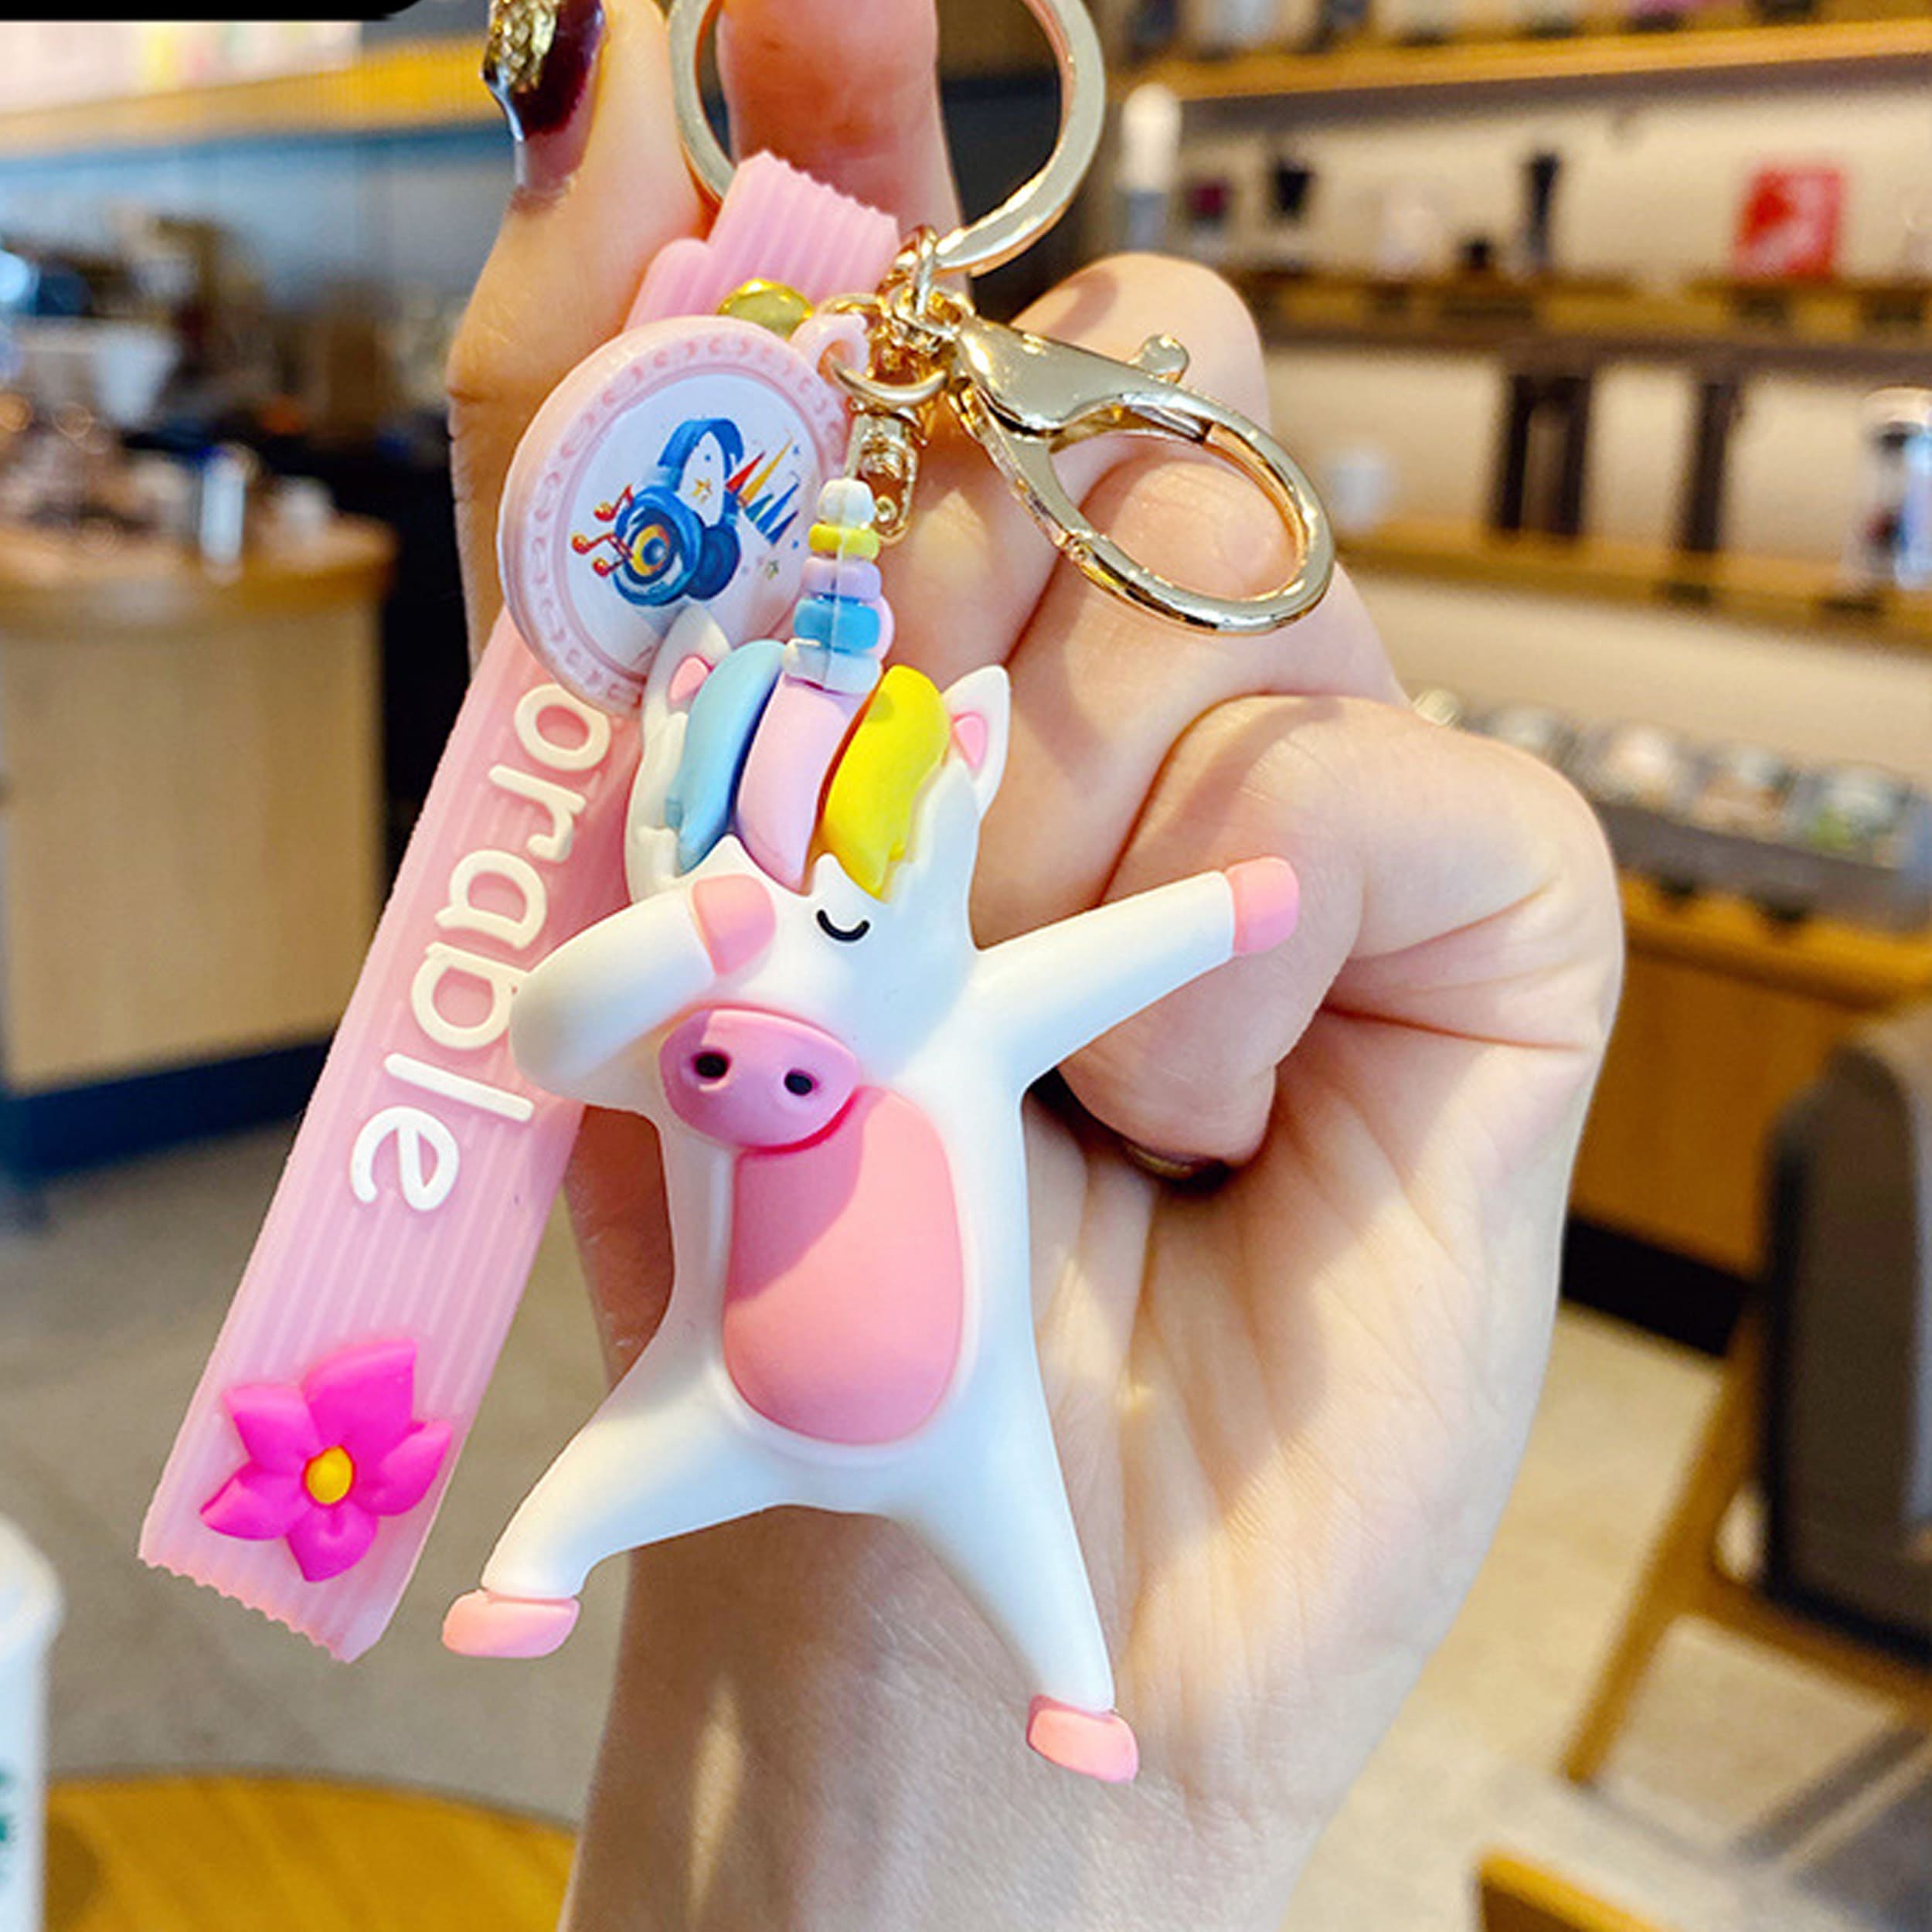 Wholesale Dog and Horse Shaped Keychains - Perfect for Animal Lovers